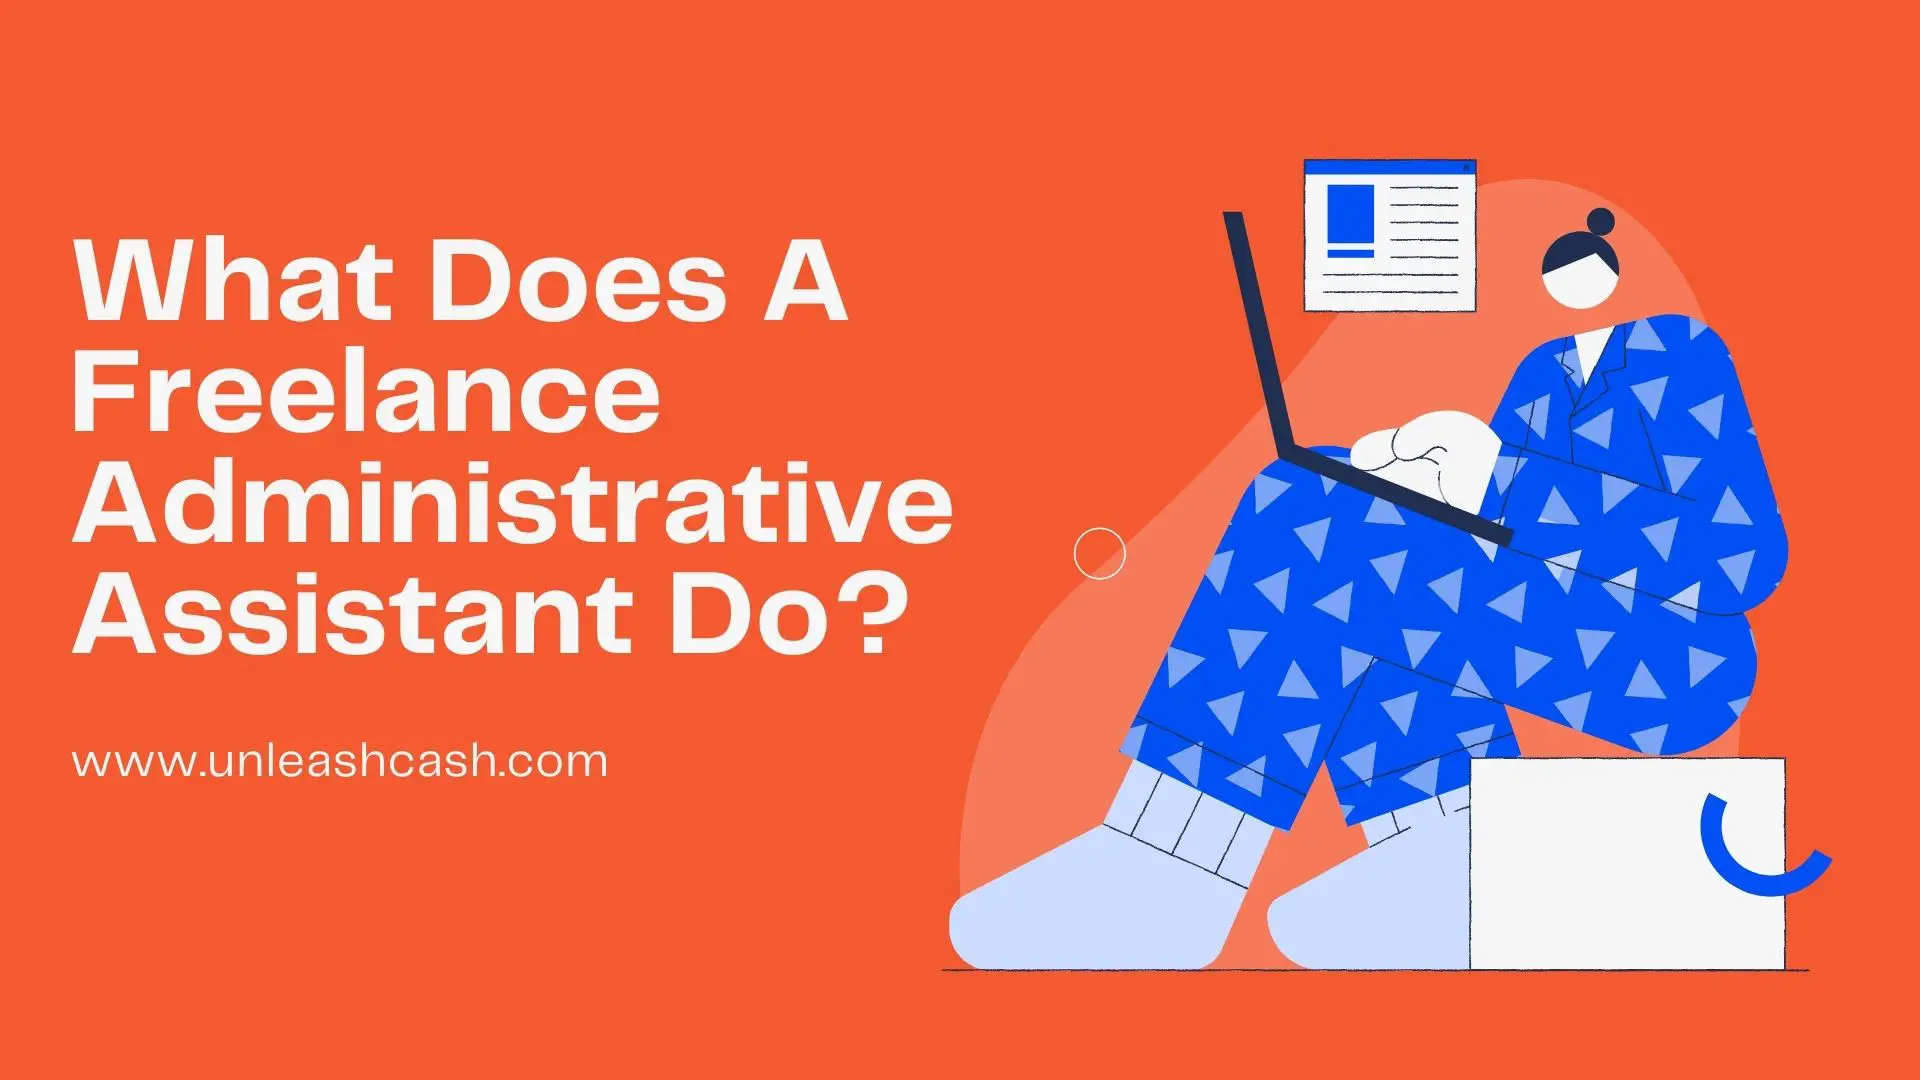 What Does A Freelance Administrative Assistant Do?